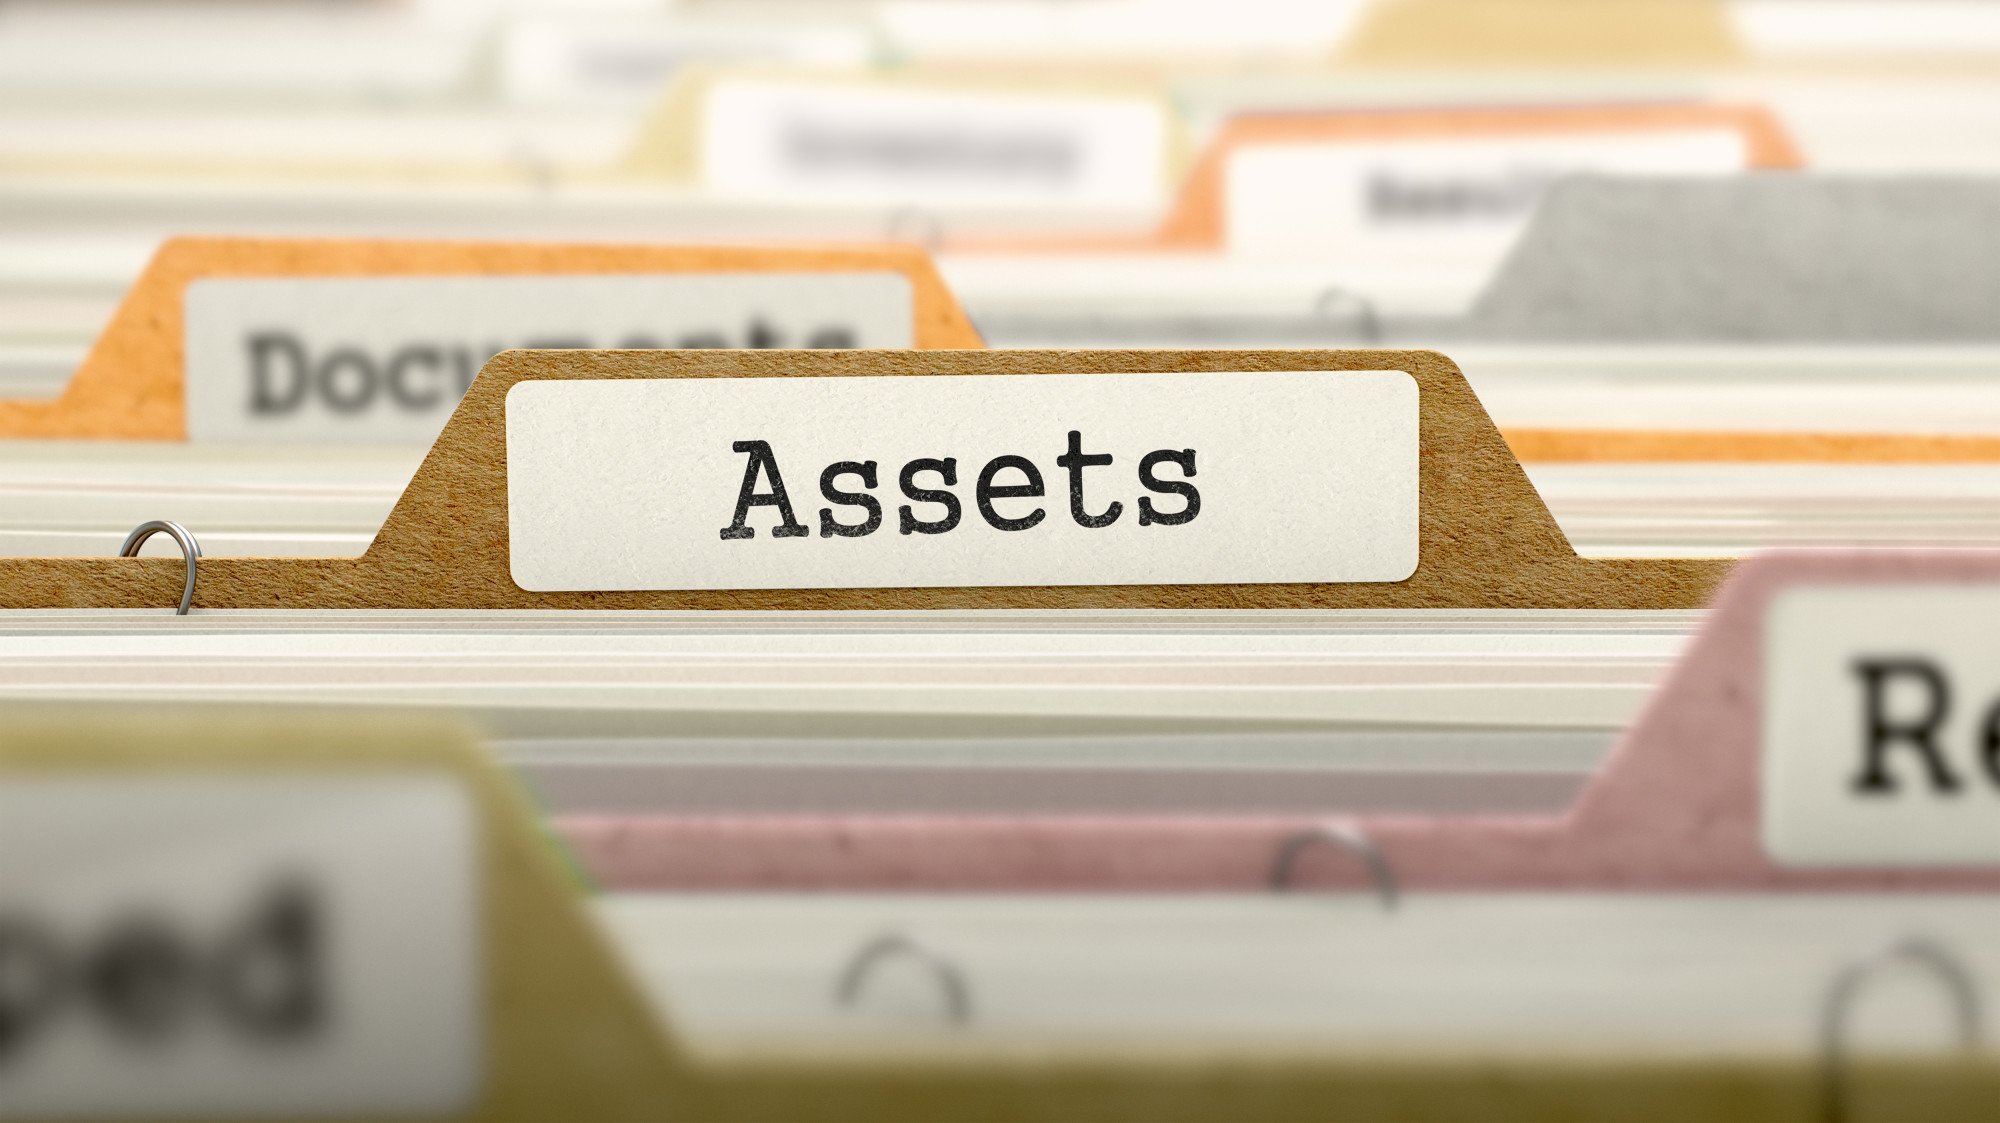 Safeguard your wealth with expert advice from an asset protection attorney. Learn the strategies to protect your assets from lawsuits and creditors.